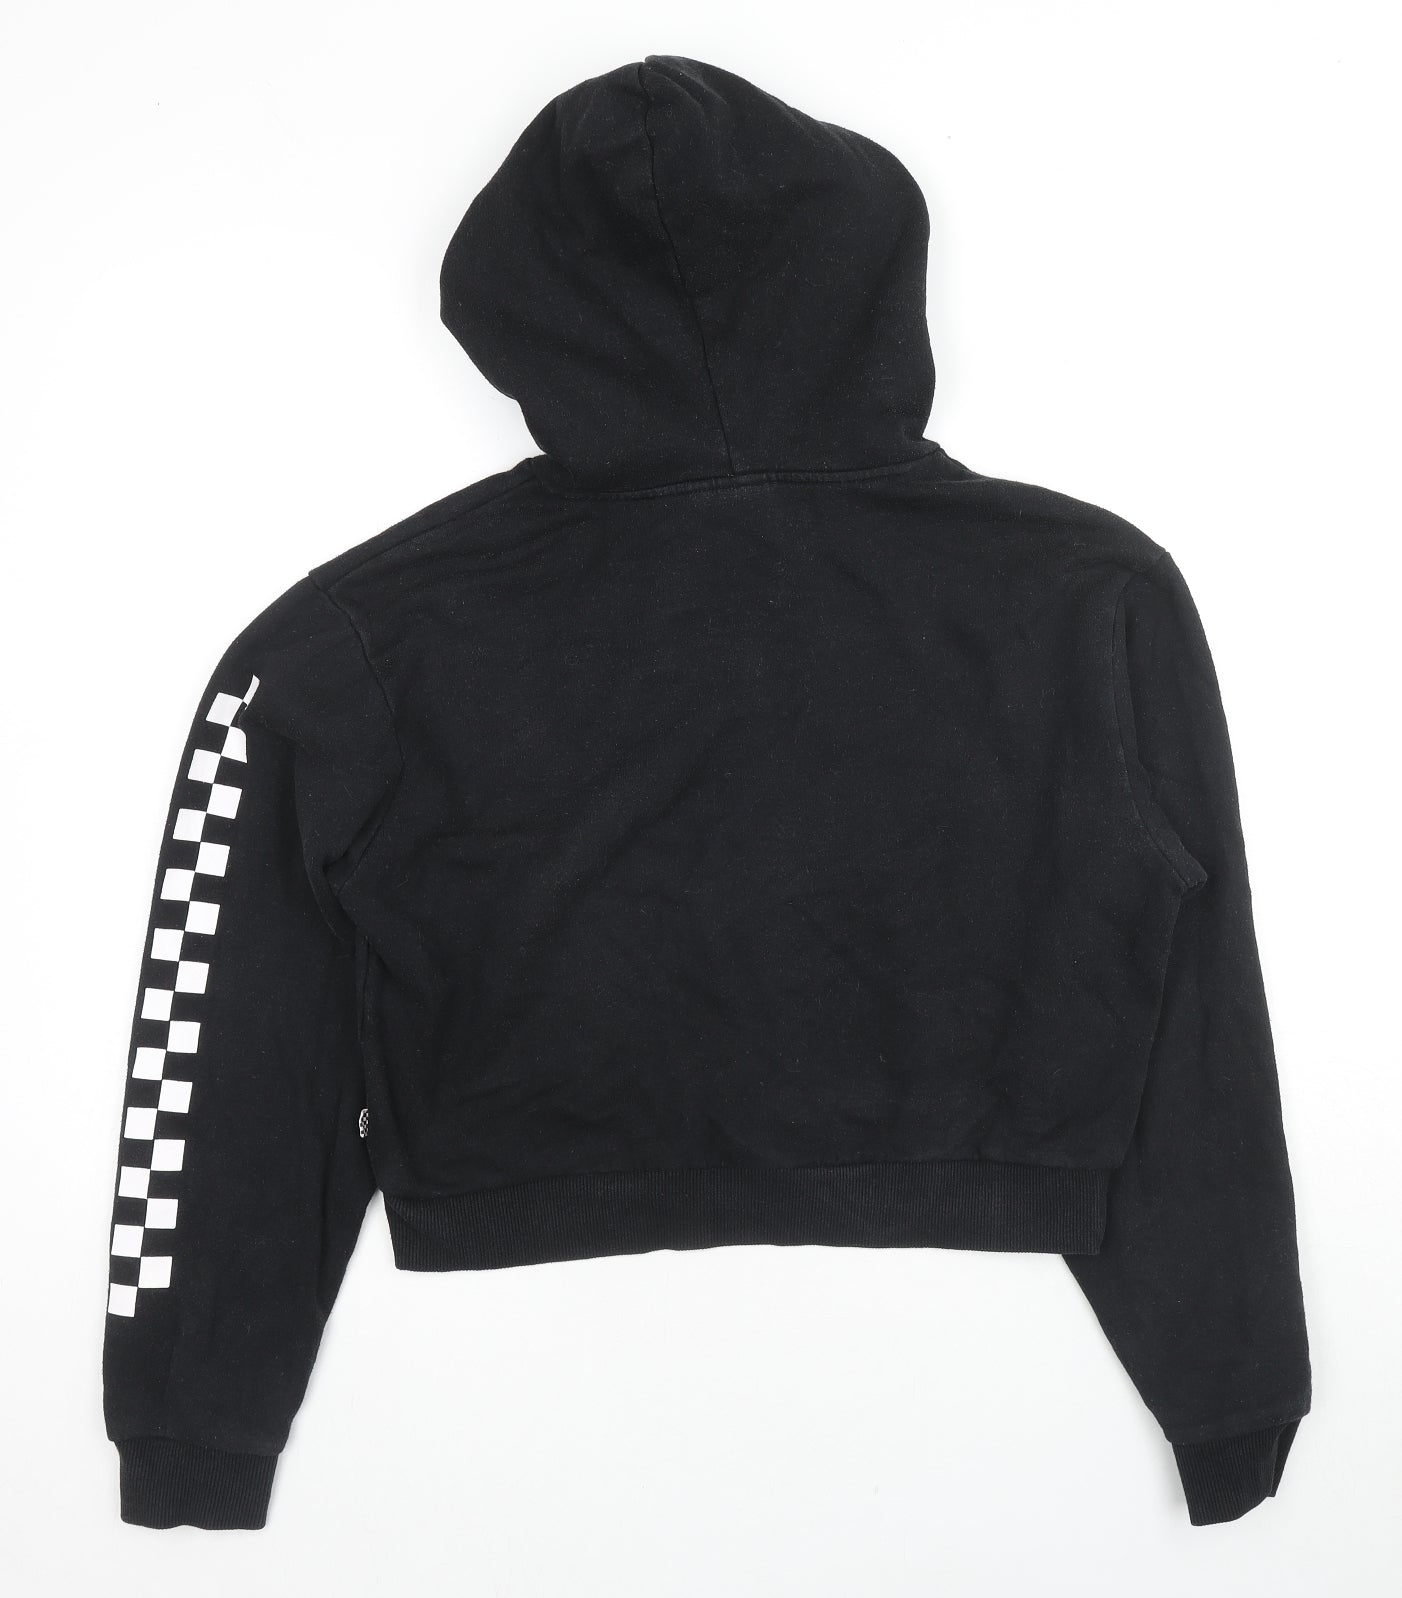 VANS Womens Black Polyester Pullover Hoodie Size S Pullover - Logo